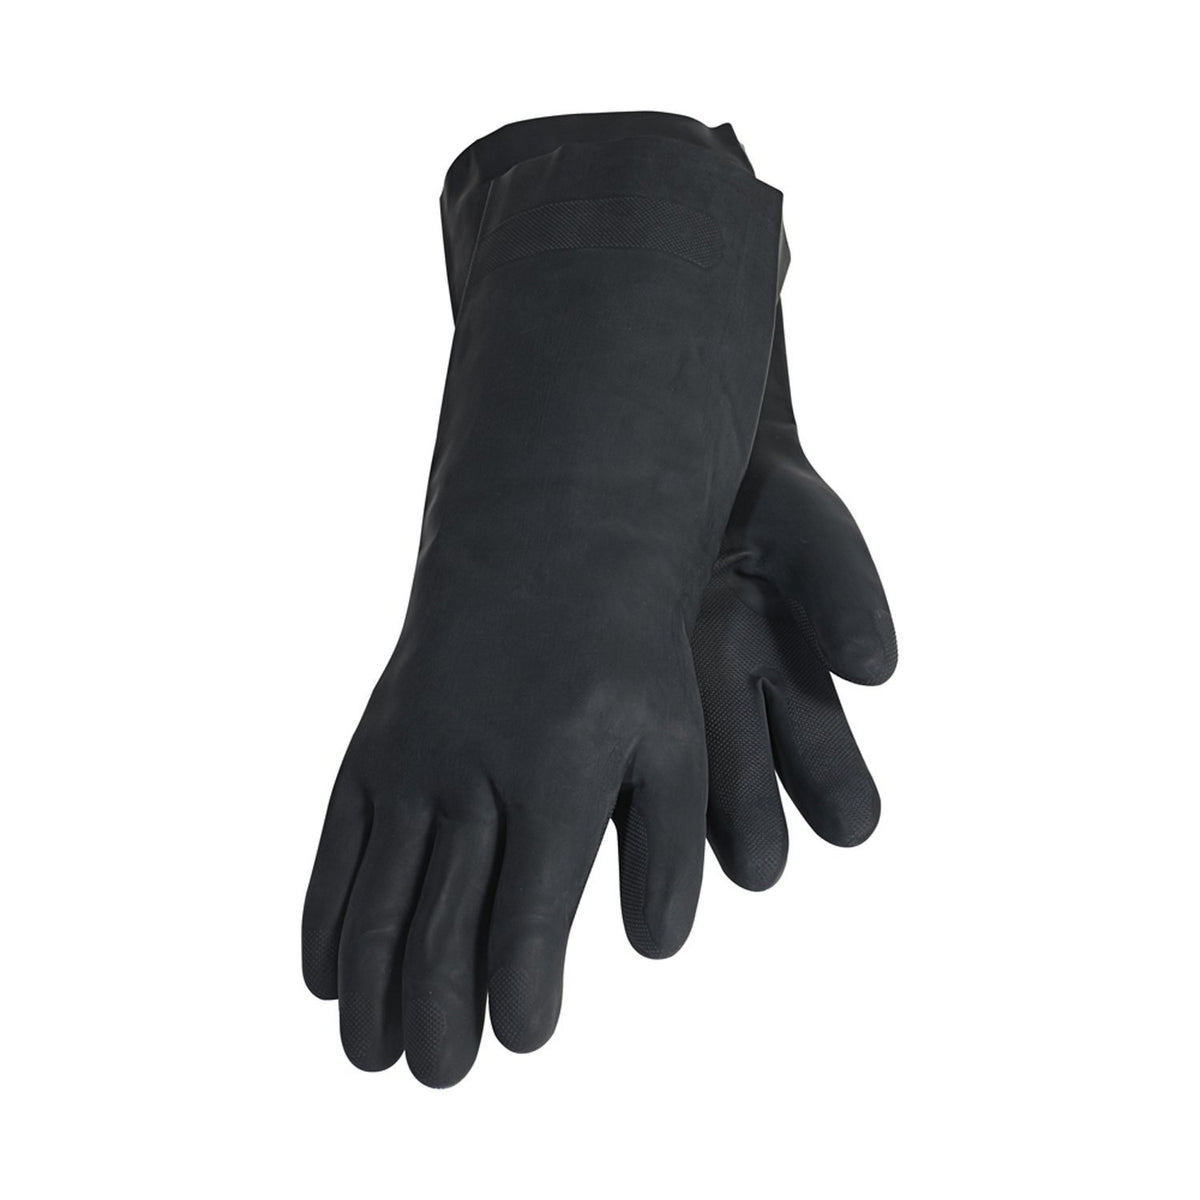 Buy 3m chemical gloves - Online store for safety & organization, rubber / vinyl in USA, on sale, low price, discount deals, coupon code